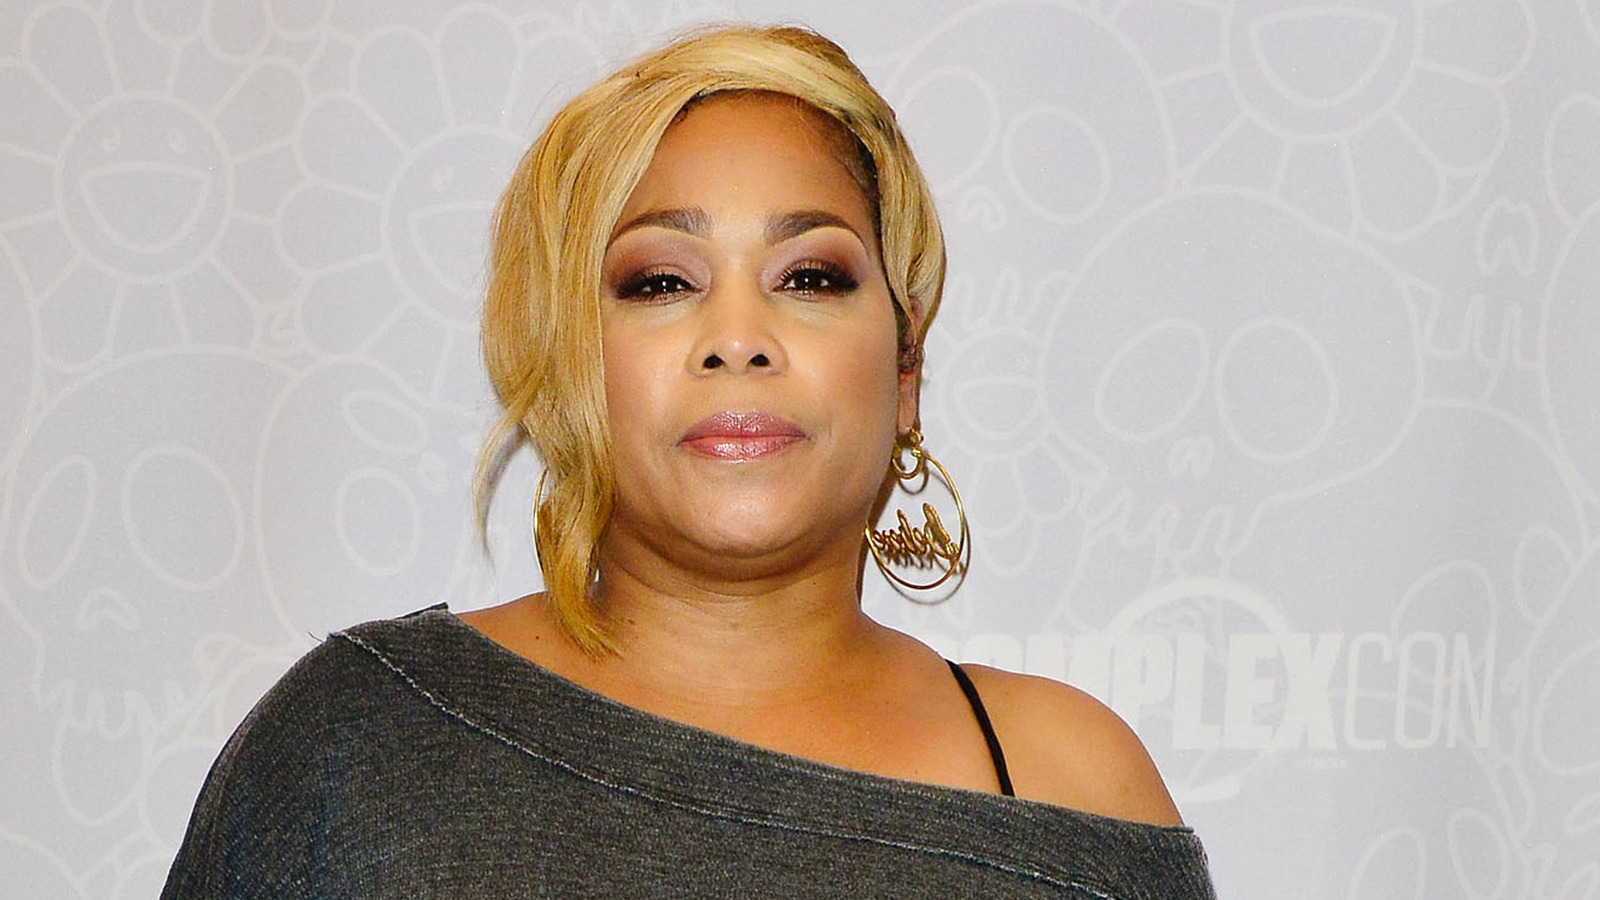 the medical condition tlc star tionne watkins lives with